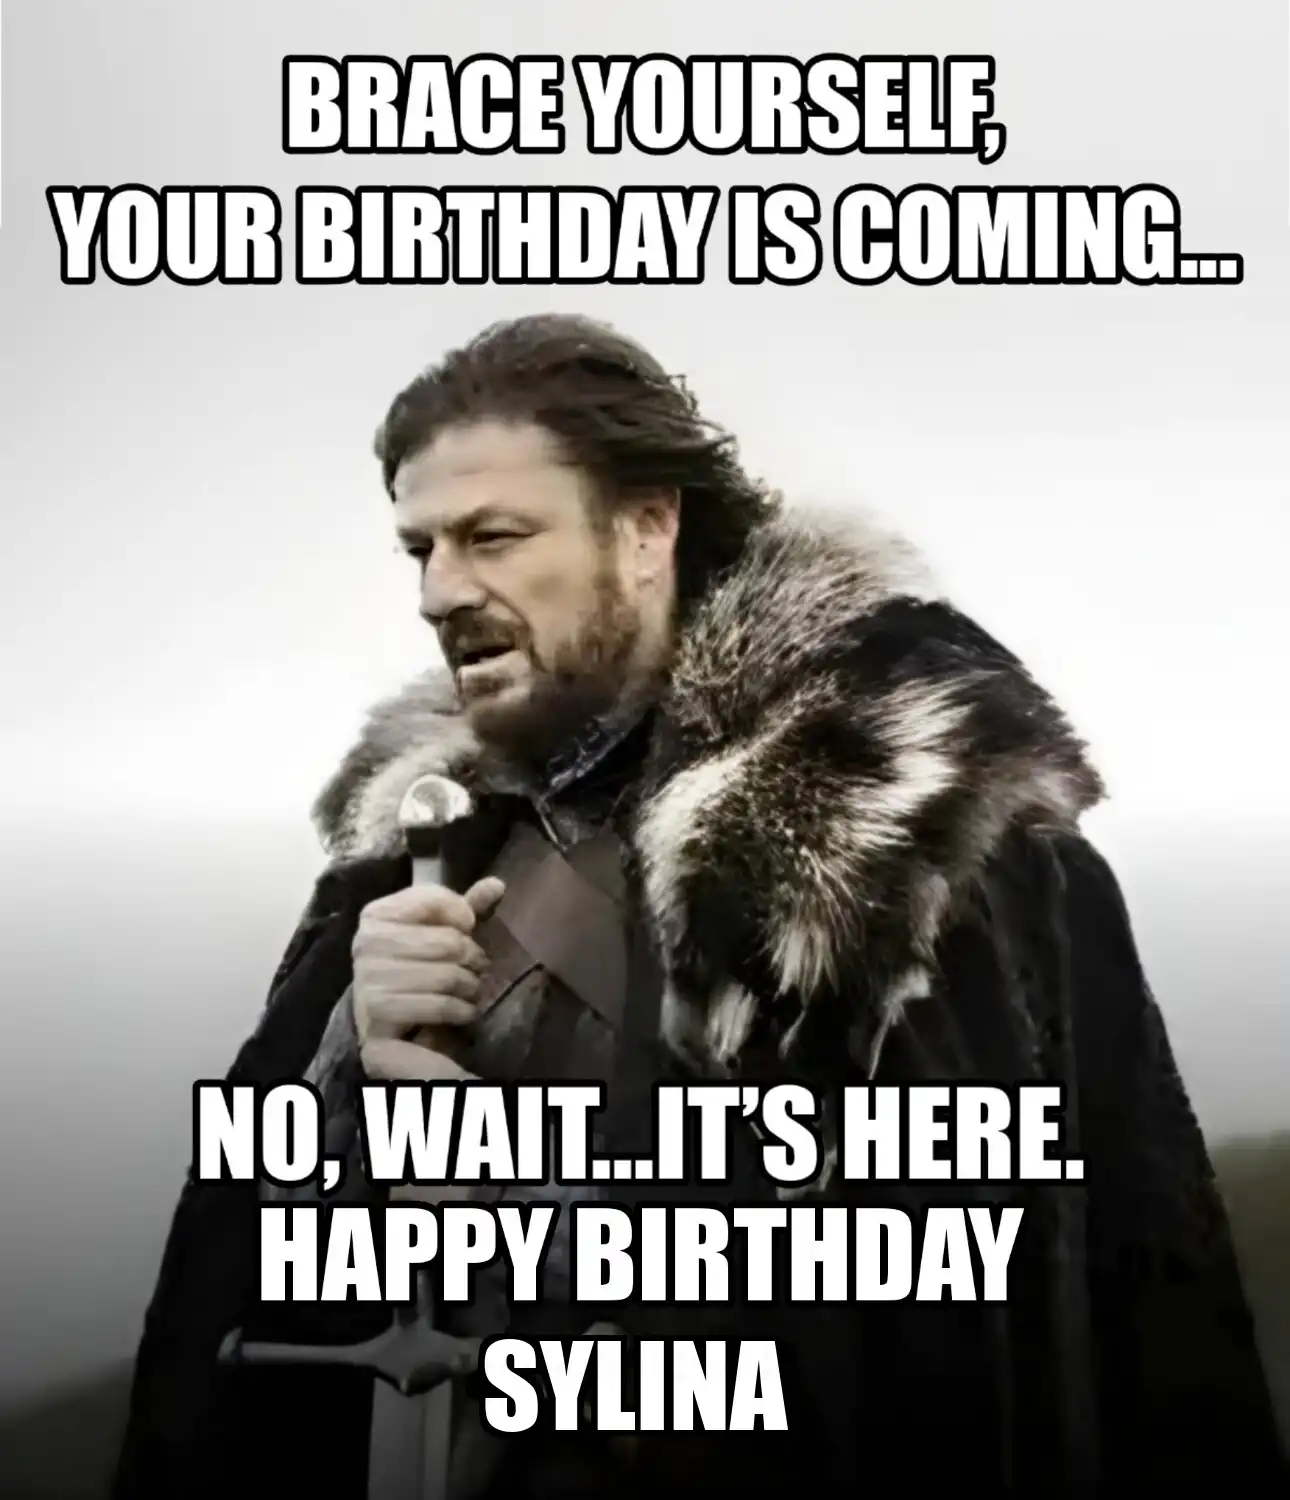 Happy Birthday Sylina Brace Yourself Your Birthday Is Coming Meme